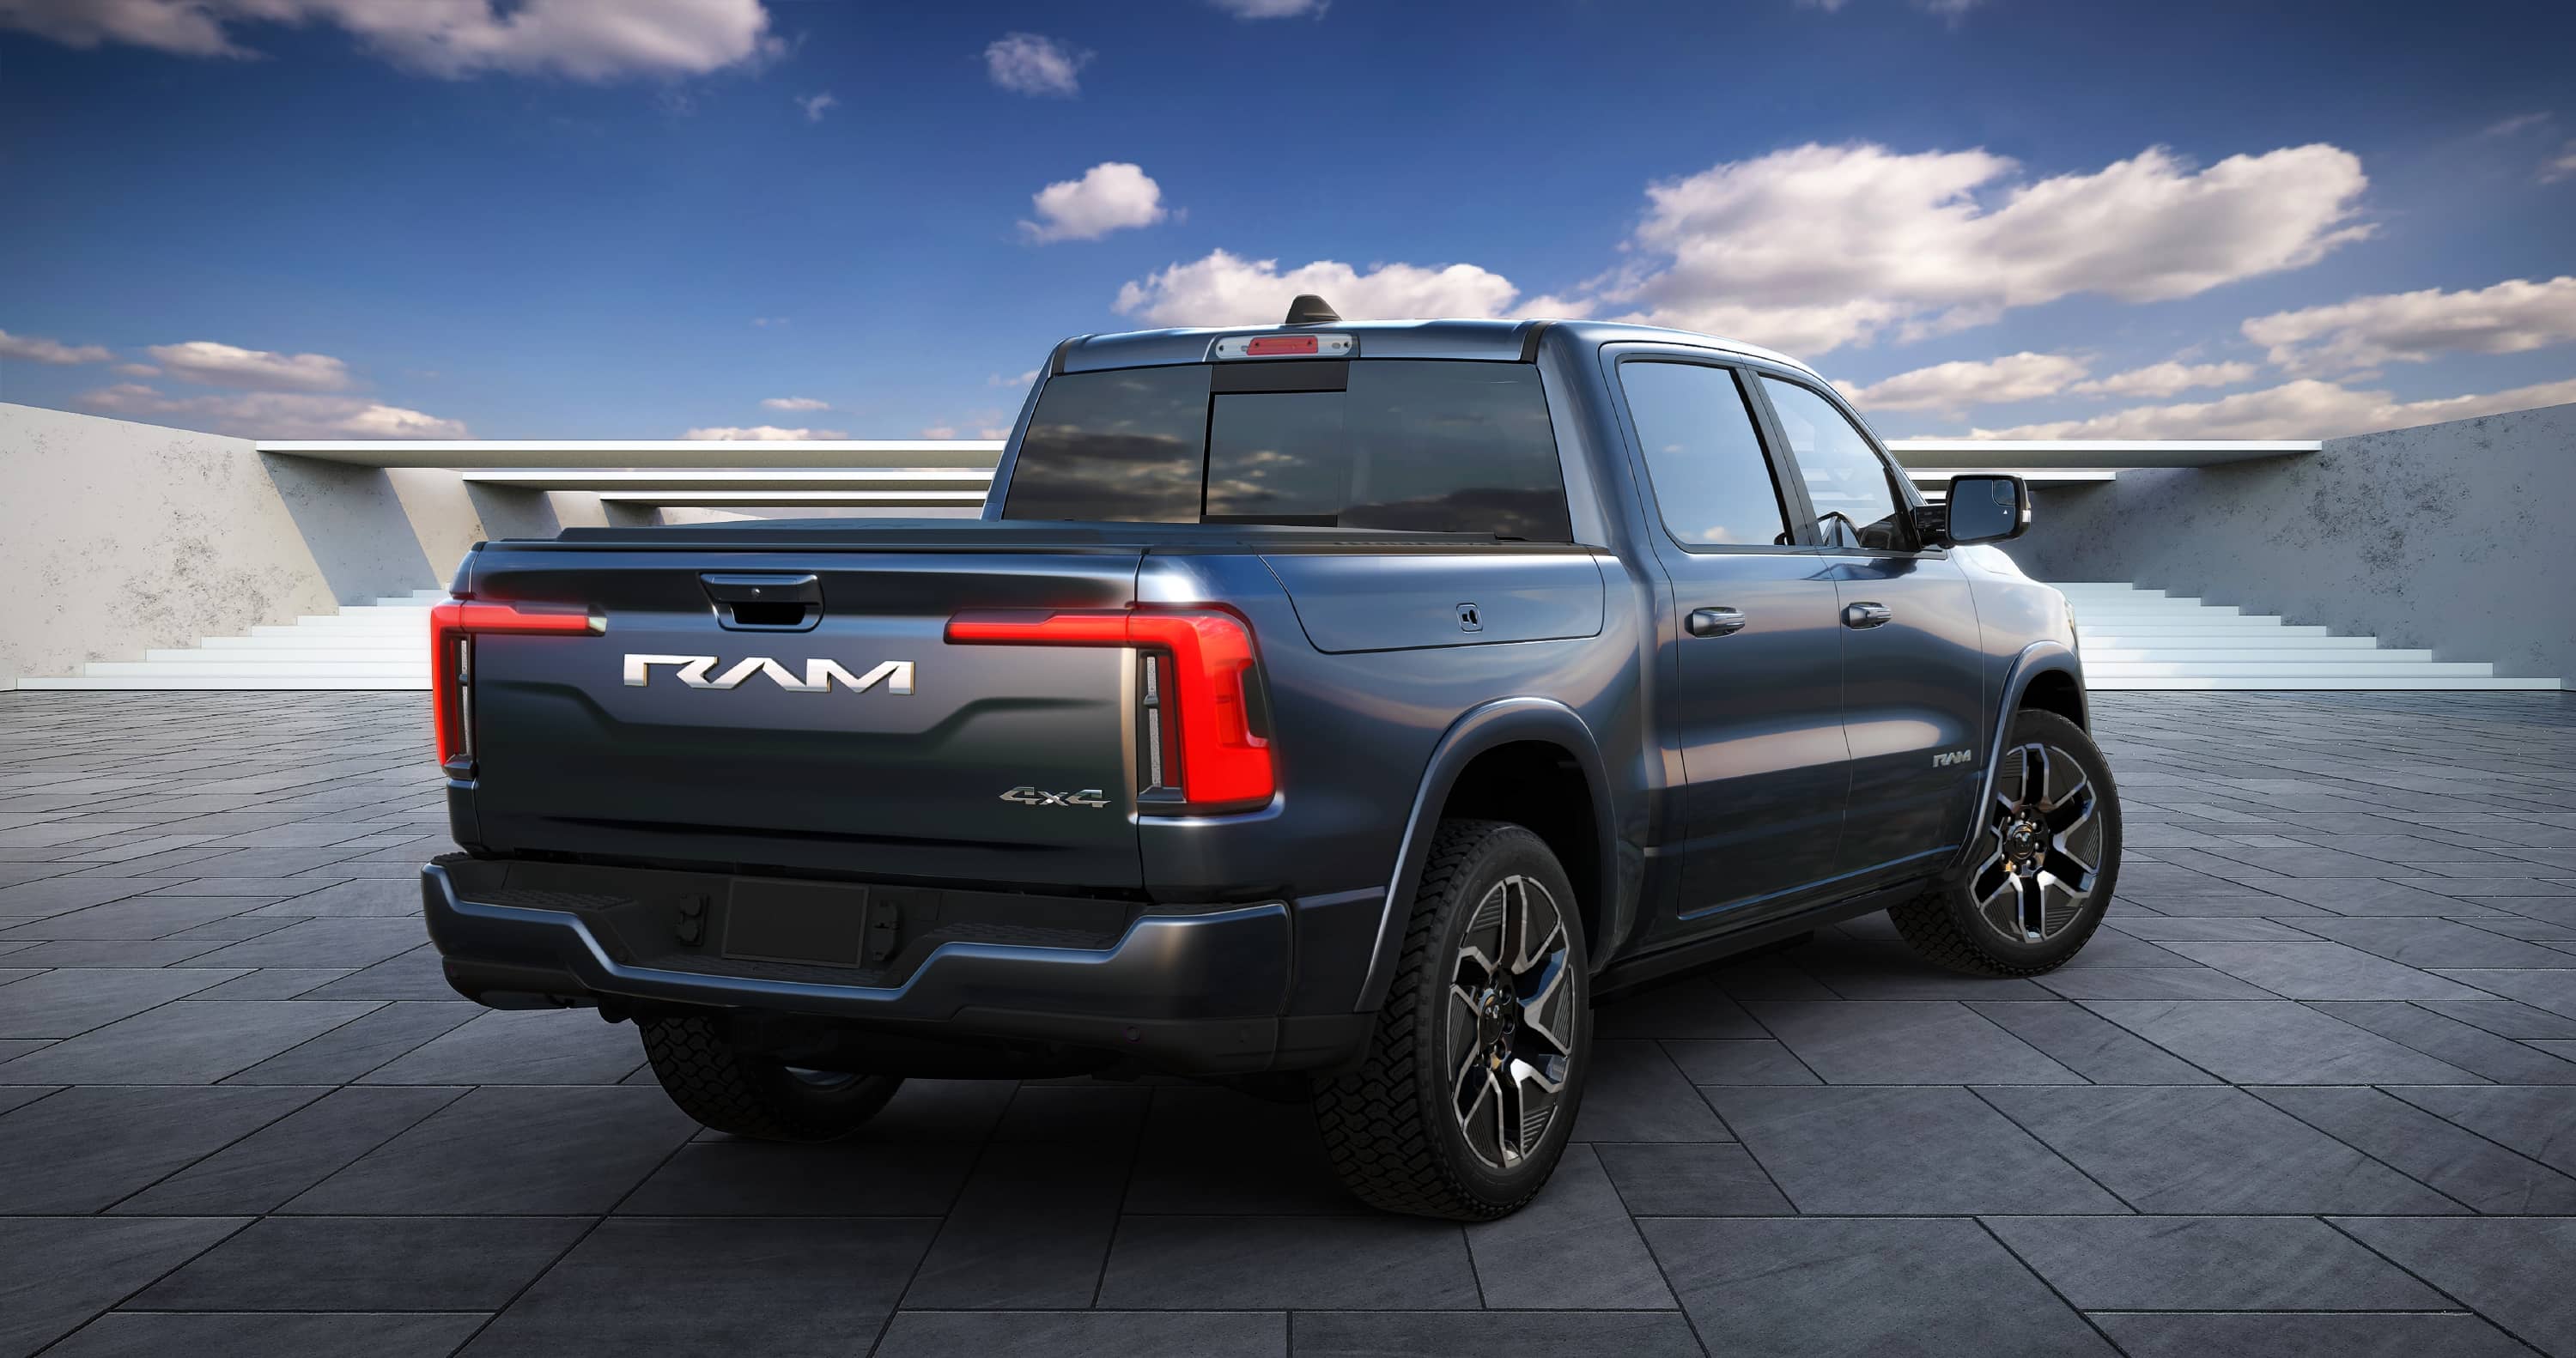 Check out the first images of the 2025 Ram 1500 REV electric truck